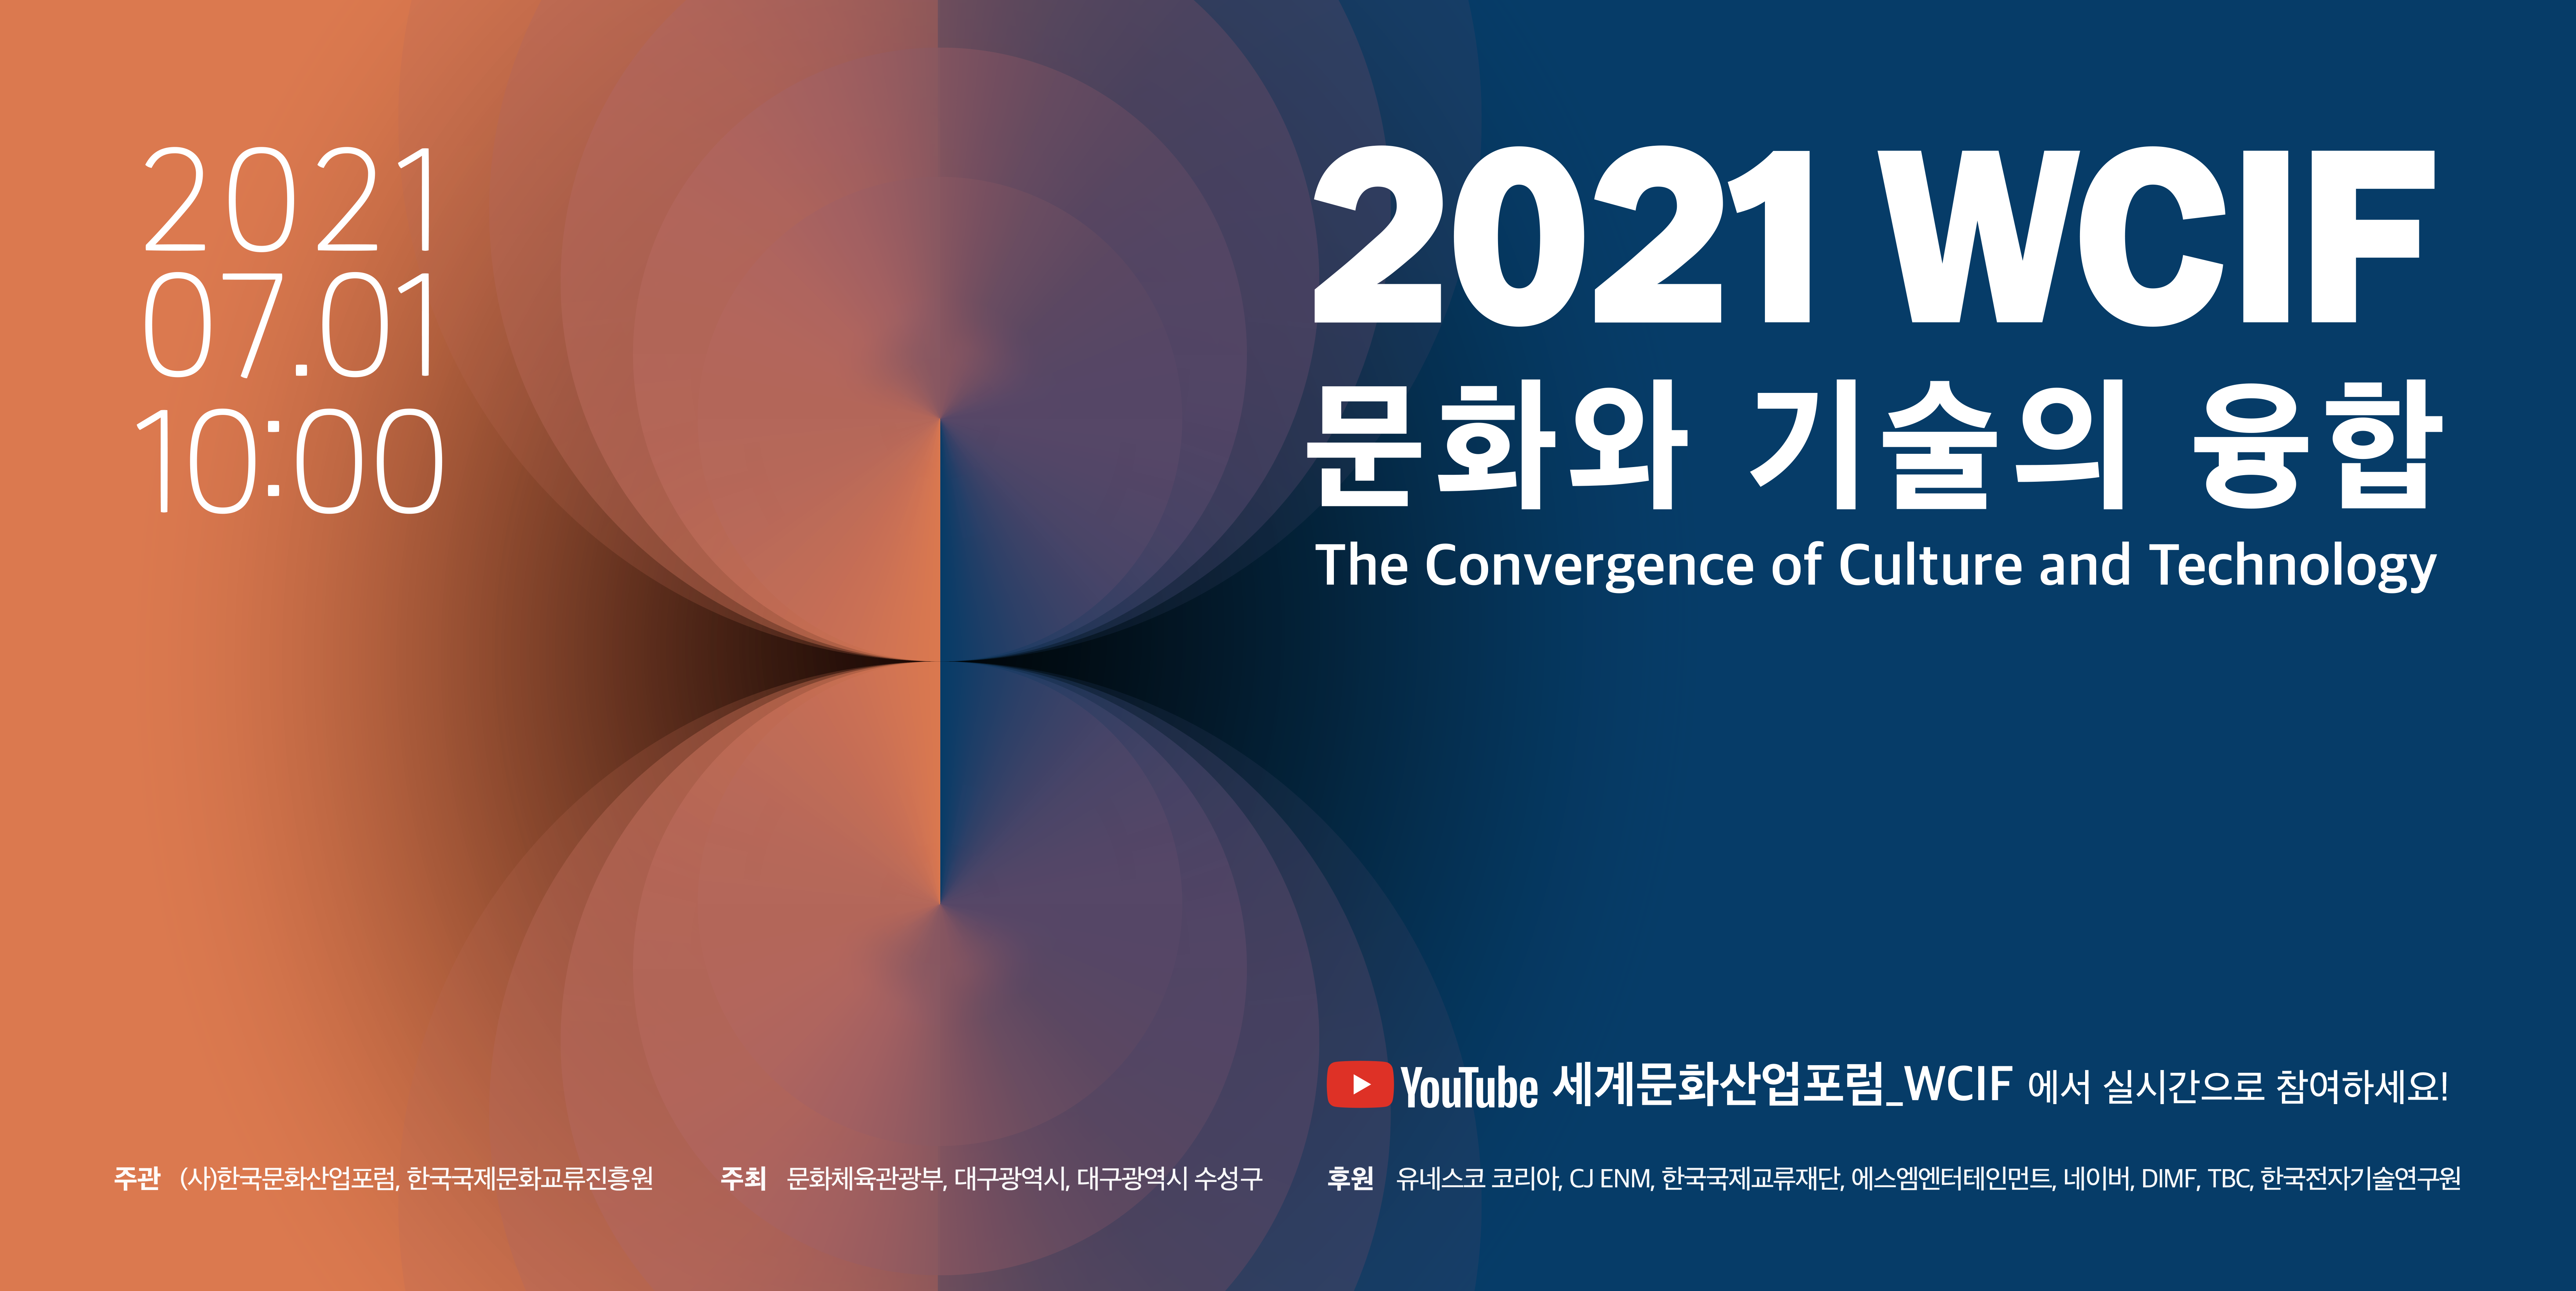 Second World Cultural Industry Forum Explores Convergence of Culture and Technology